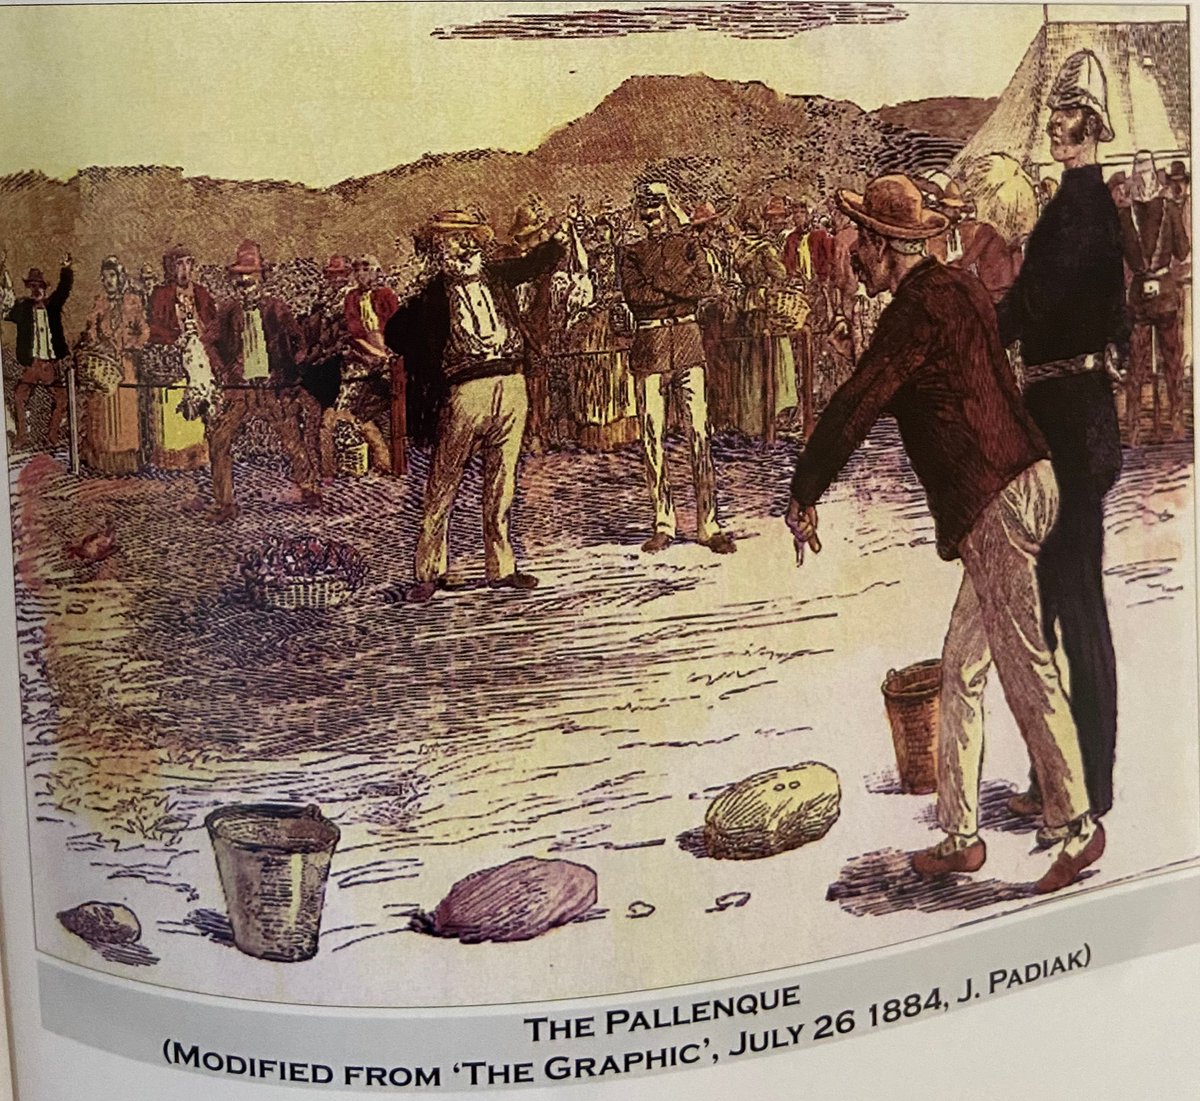 Some Strange Rules- Merchandise handled with iron tongs- Money immersed in vinegar - "The Pallenque" - a neutral strip of land created between Gibraltar and Spain where either side would place goods in the middle, retreat and allow their trading partners to collect (11/17)